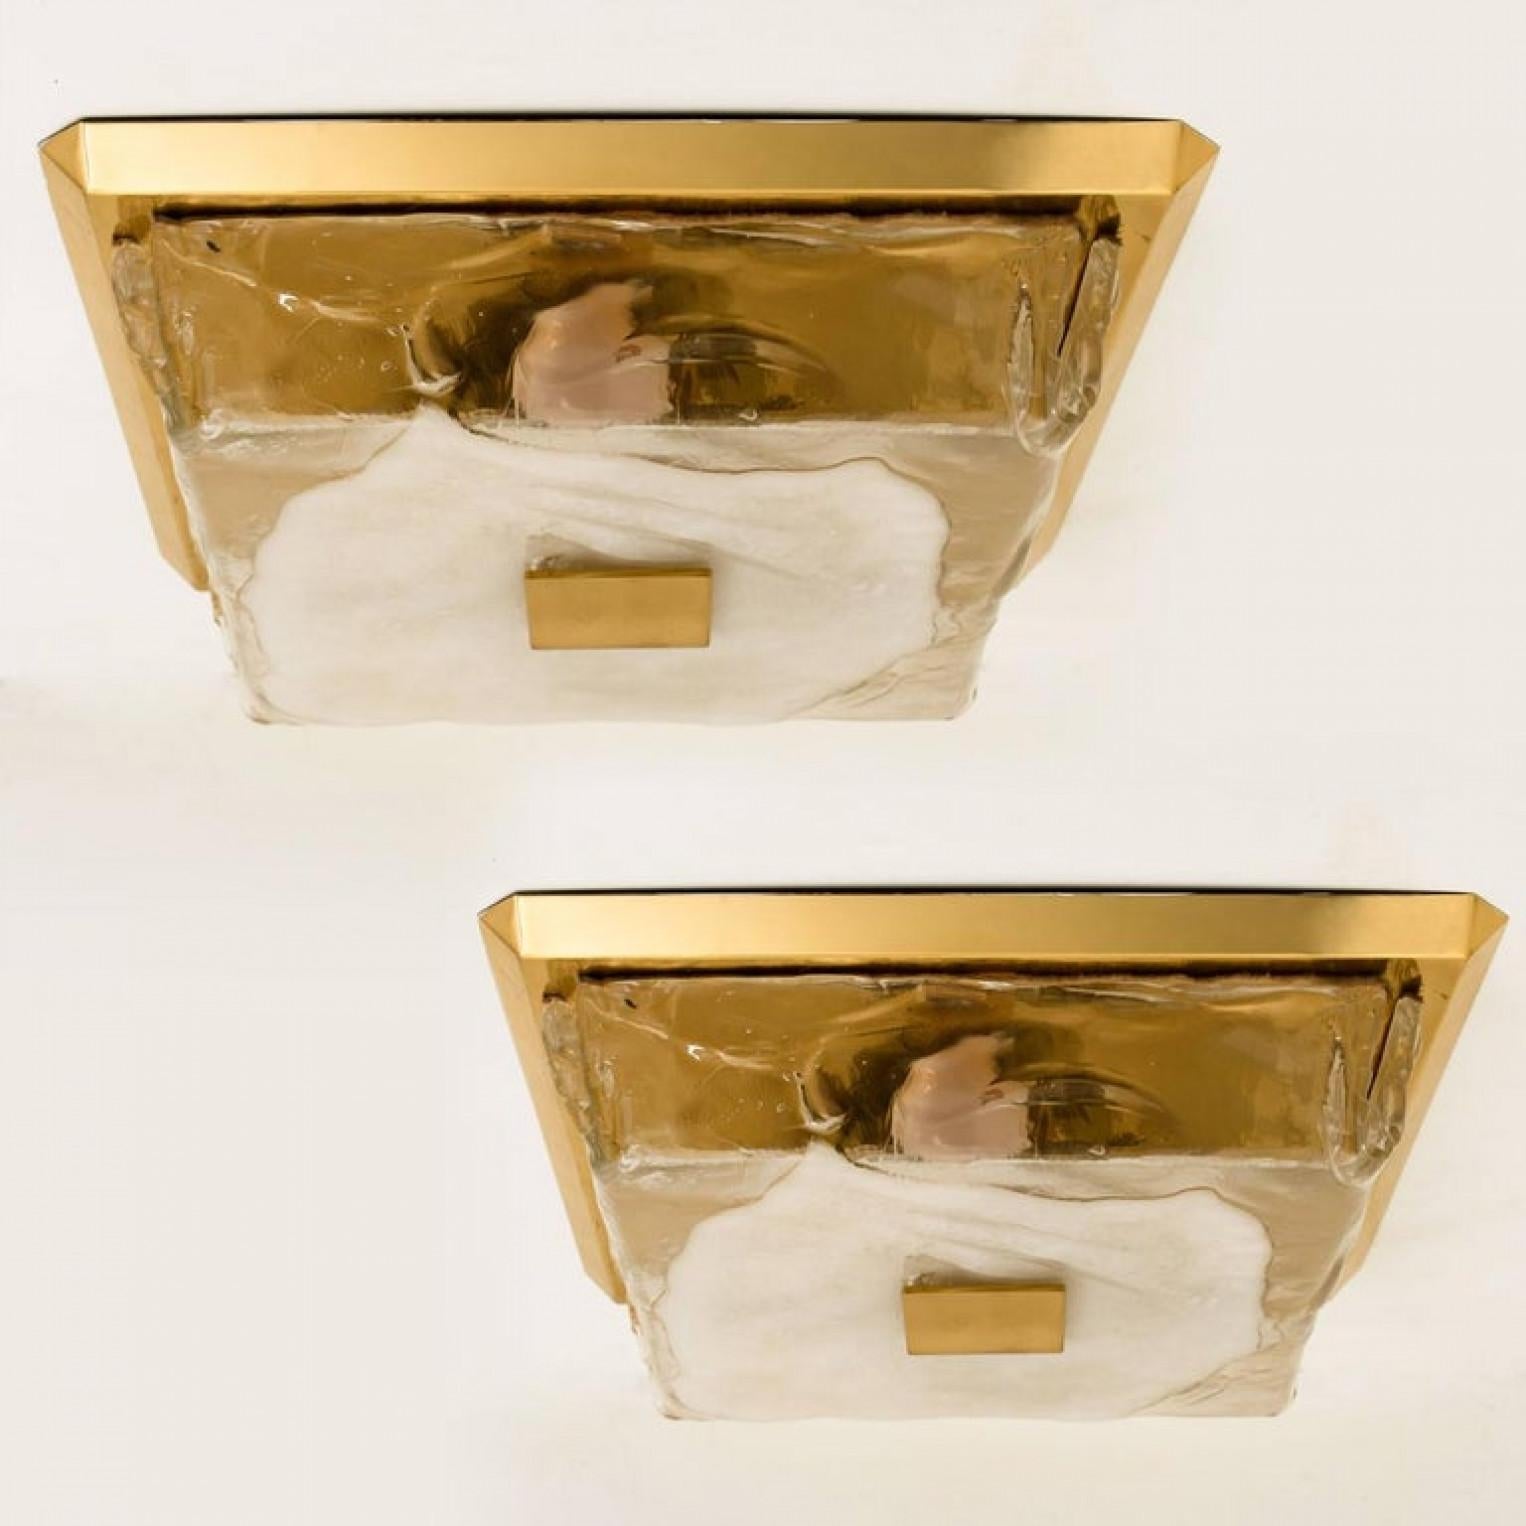 1 of the 2 high-end square flush mount ceiling light with brass back plate and hand blown Murano glass in ice melted shape by Kalmar, Austria, 1960s. High quality of materials. Illuminates beautifully.

Good condition. Each flush mount requires 4 x